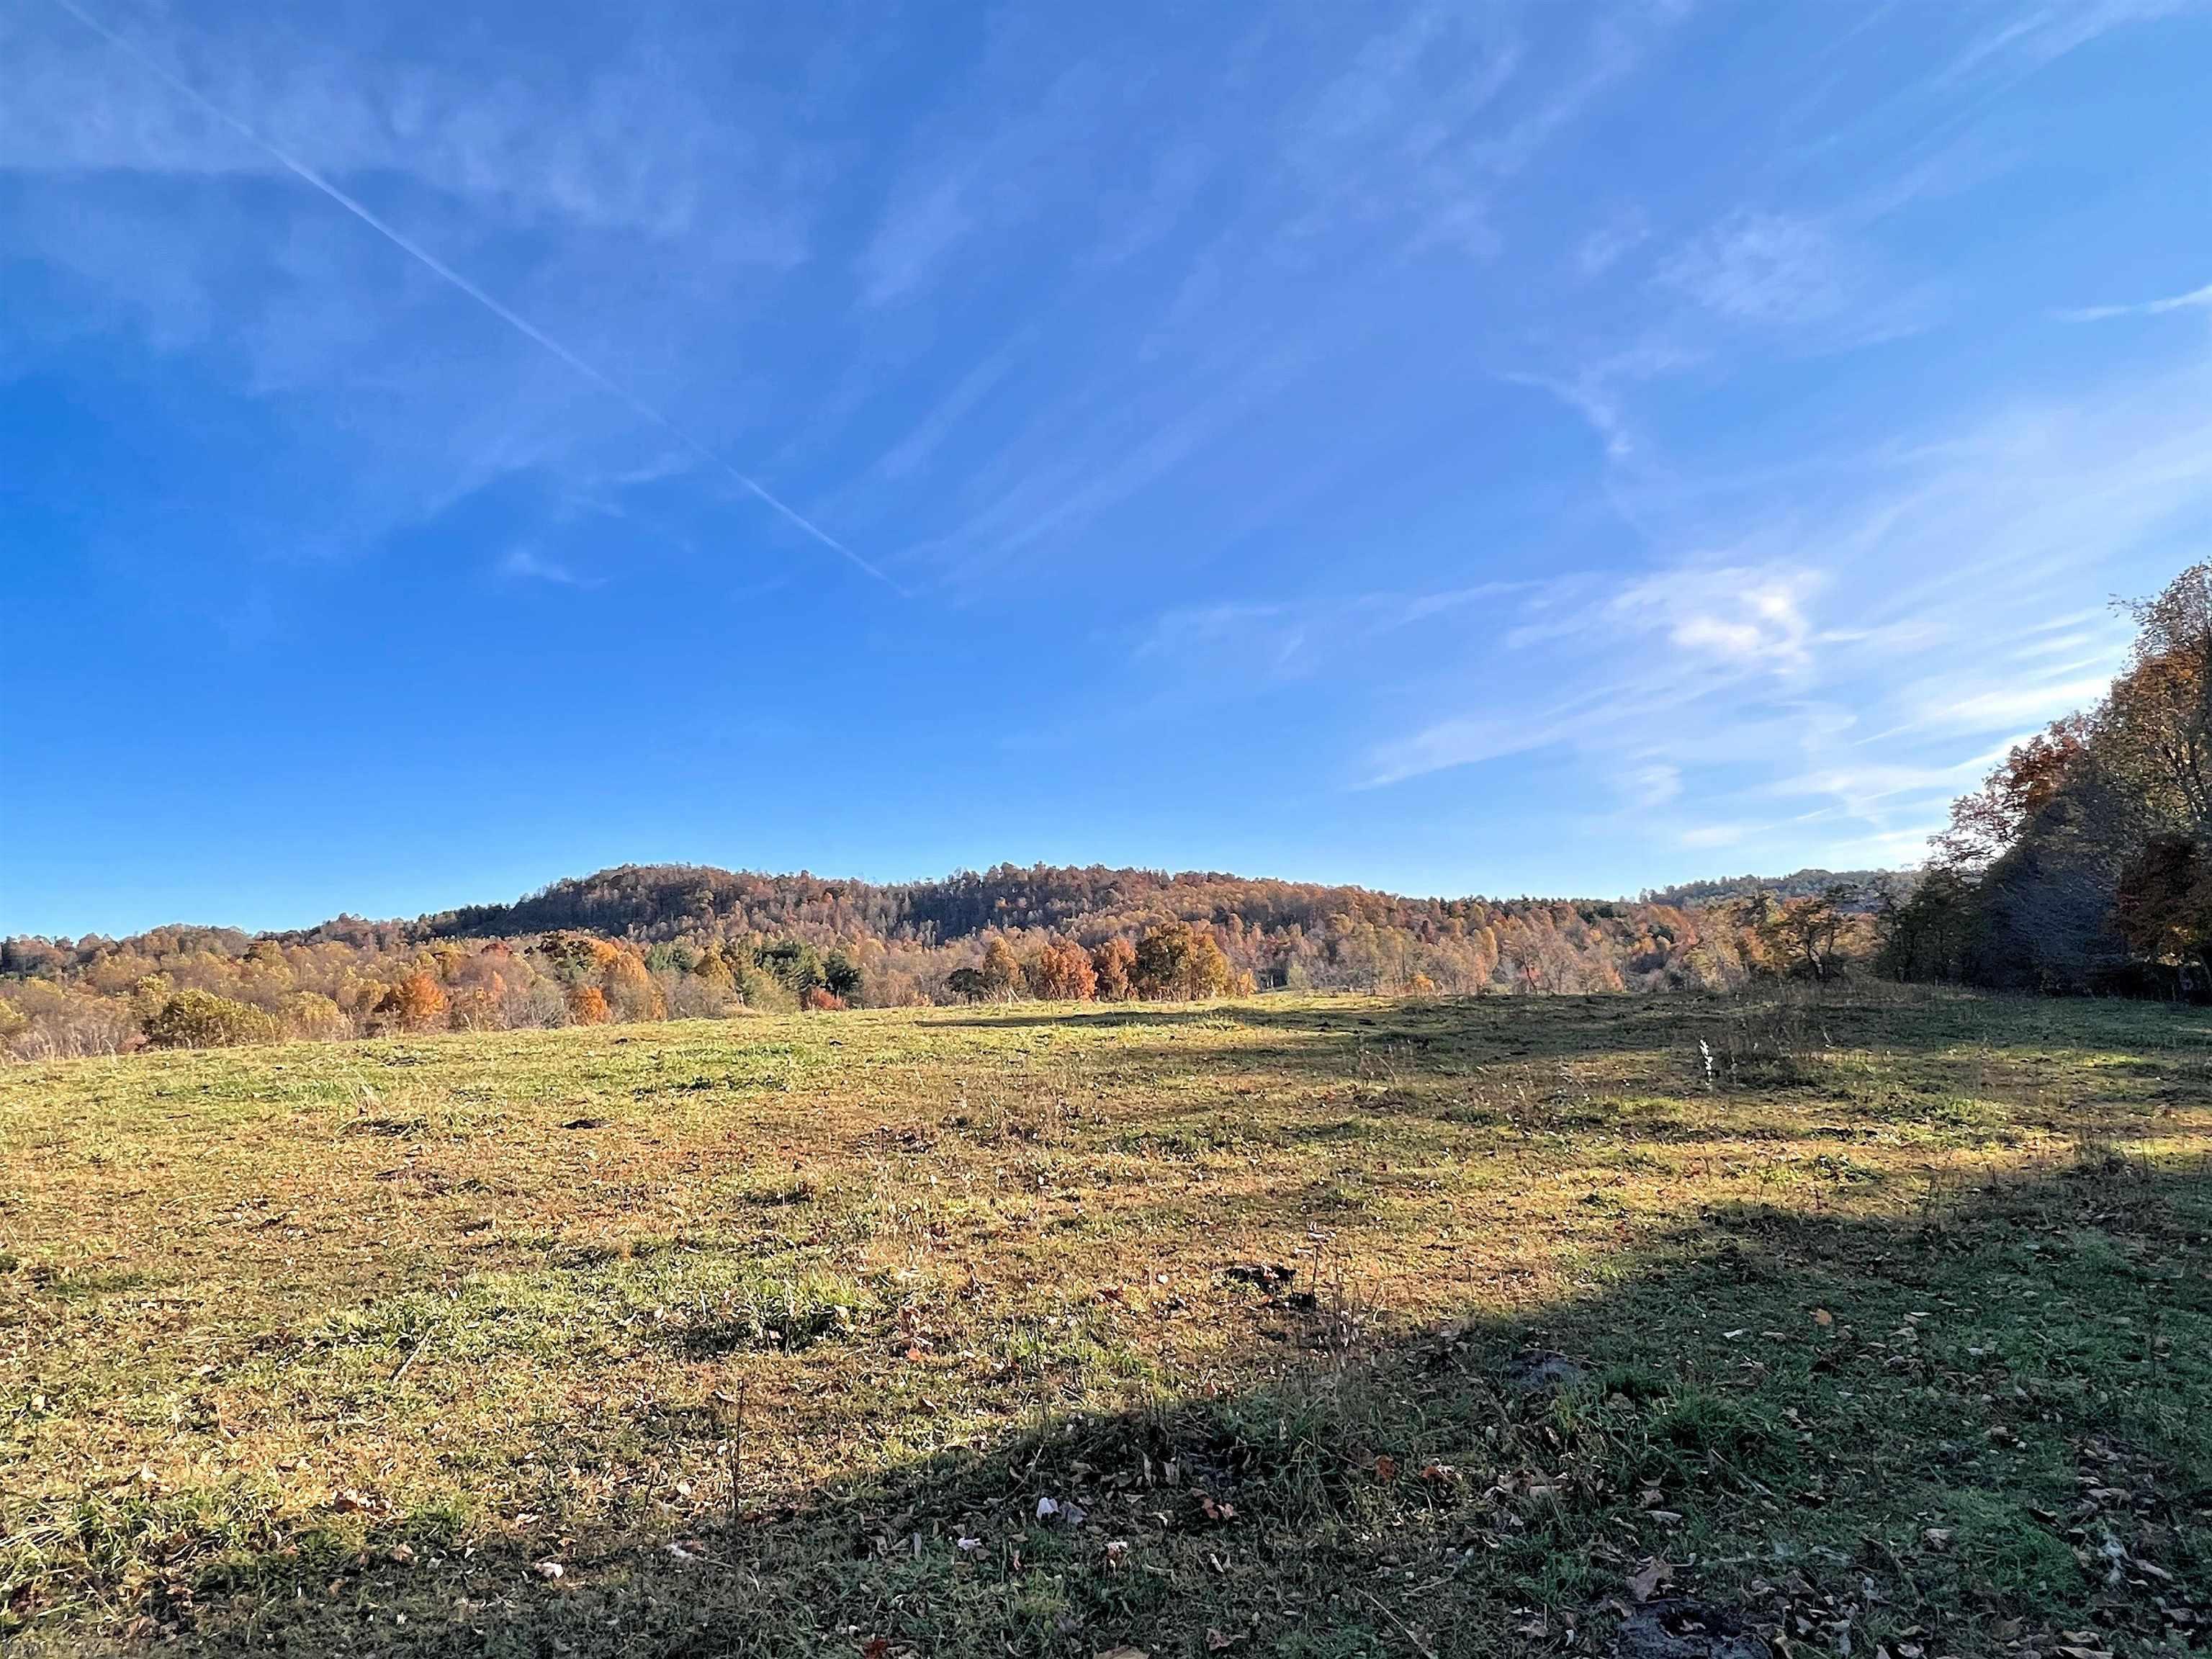 This a great opportunity to purchase a 24+ ac property with great long range views that is suitable for cattle/horses with a creek, pasture and some fencing. Newly perked for a 3 Bedroom Septic System and a new survey has been completed.